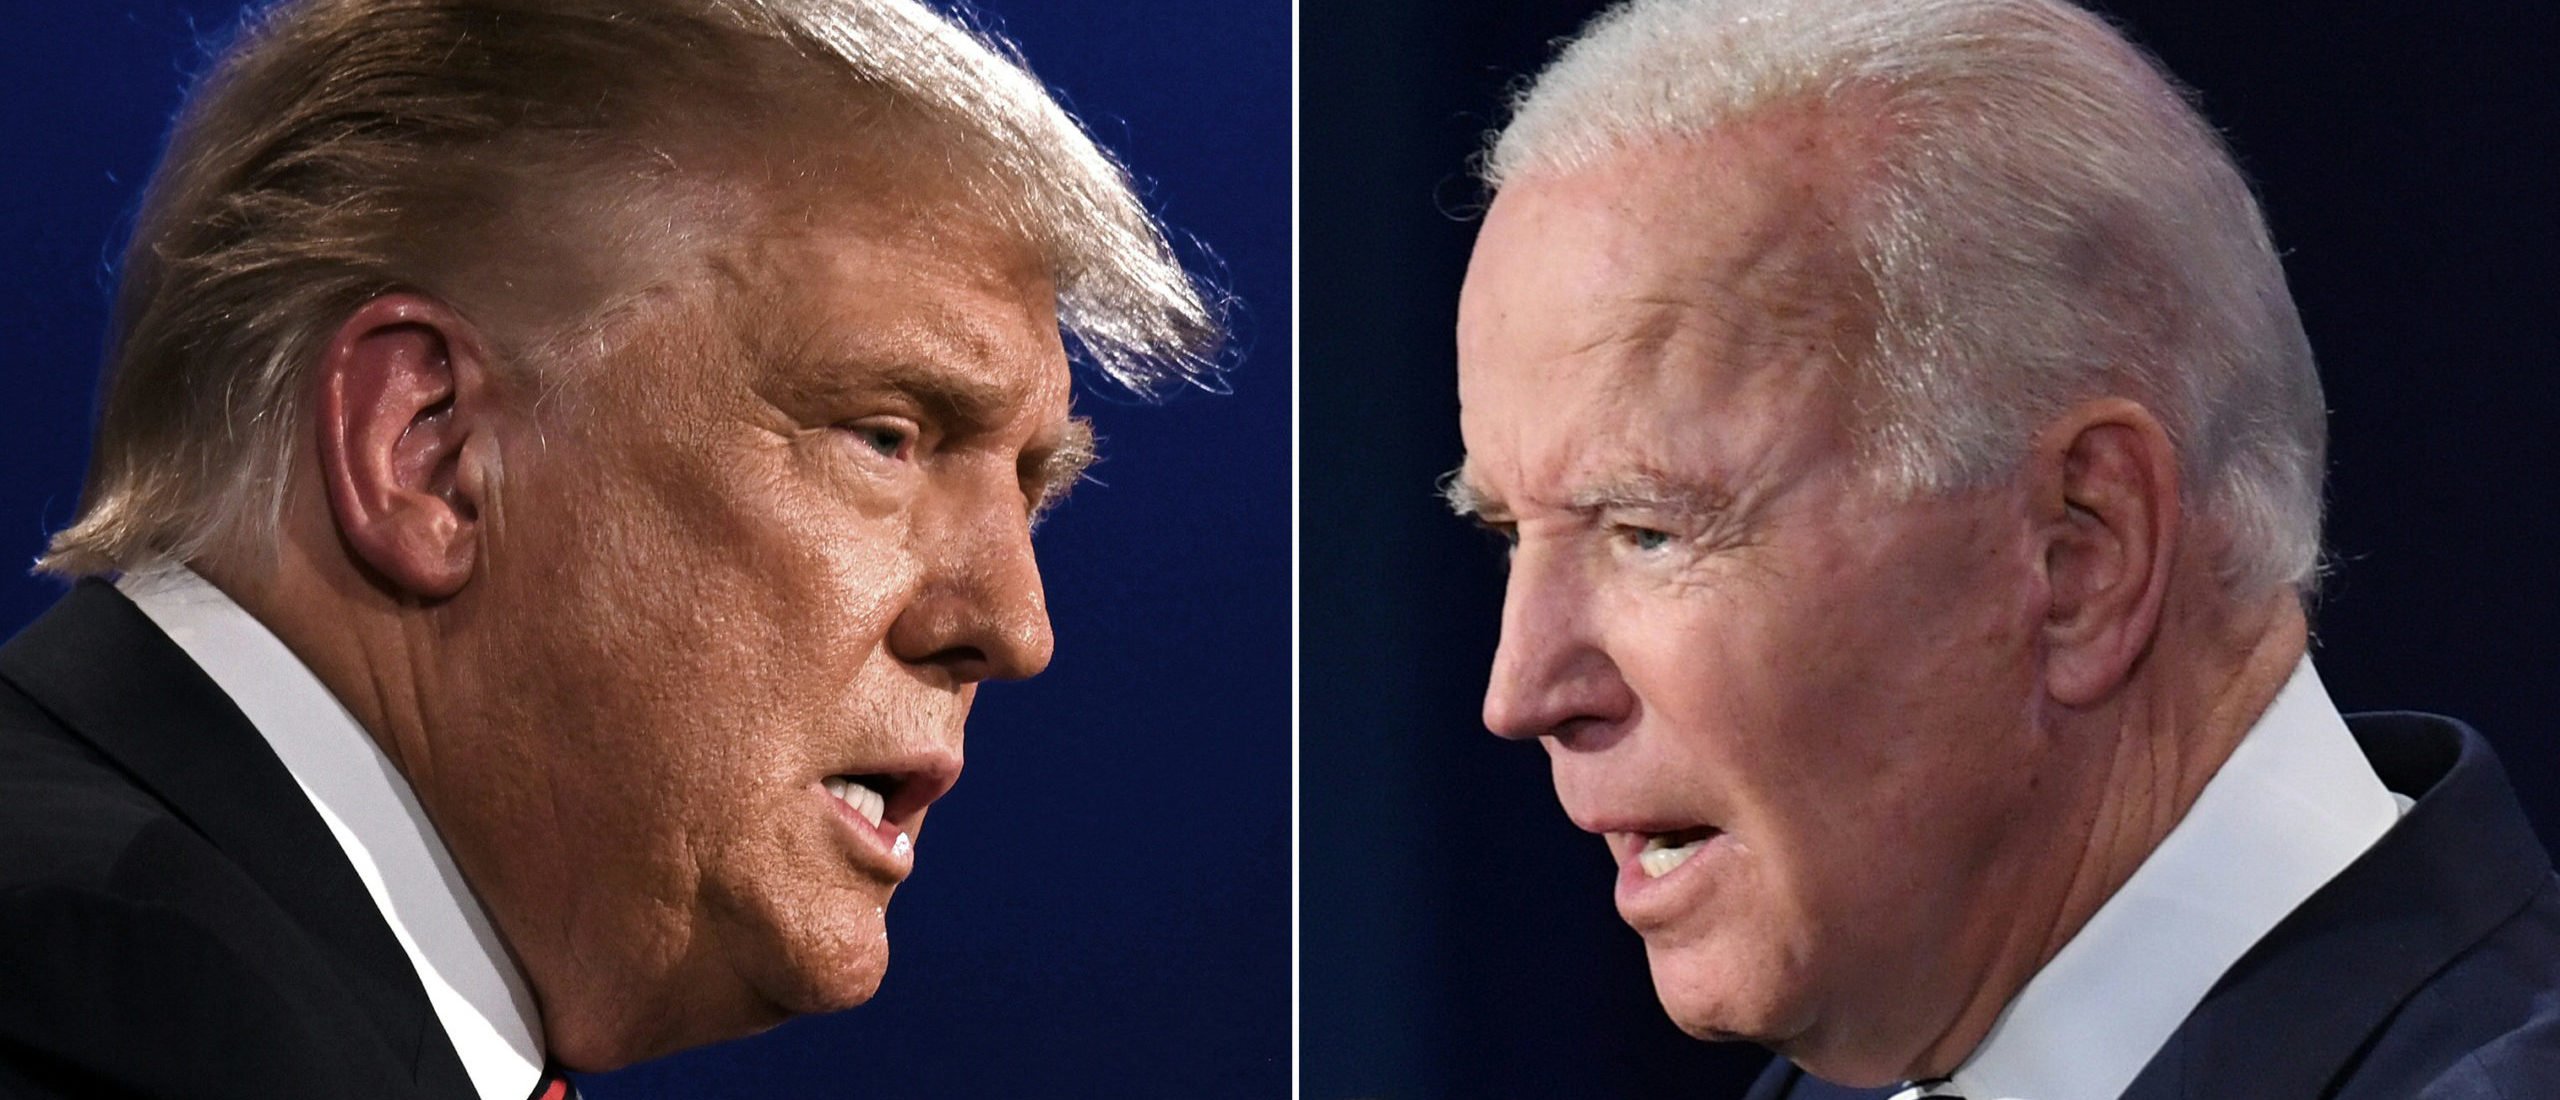 TOPSHOT - (COMBO) This combination of pictures created on September 29, 2020 shows US President Donald Trump (L) and Democratic Presidential candidate former Vice President Joe Biden squaring off during the first presidential debate at the Case Western Reserve University and Cleveland Clinic in Cleveland, Ohio on September 29, 2020. (Photos by JIM WATSON and SAUL LOEB / AFP) 